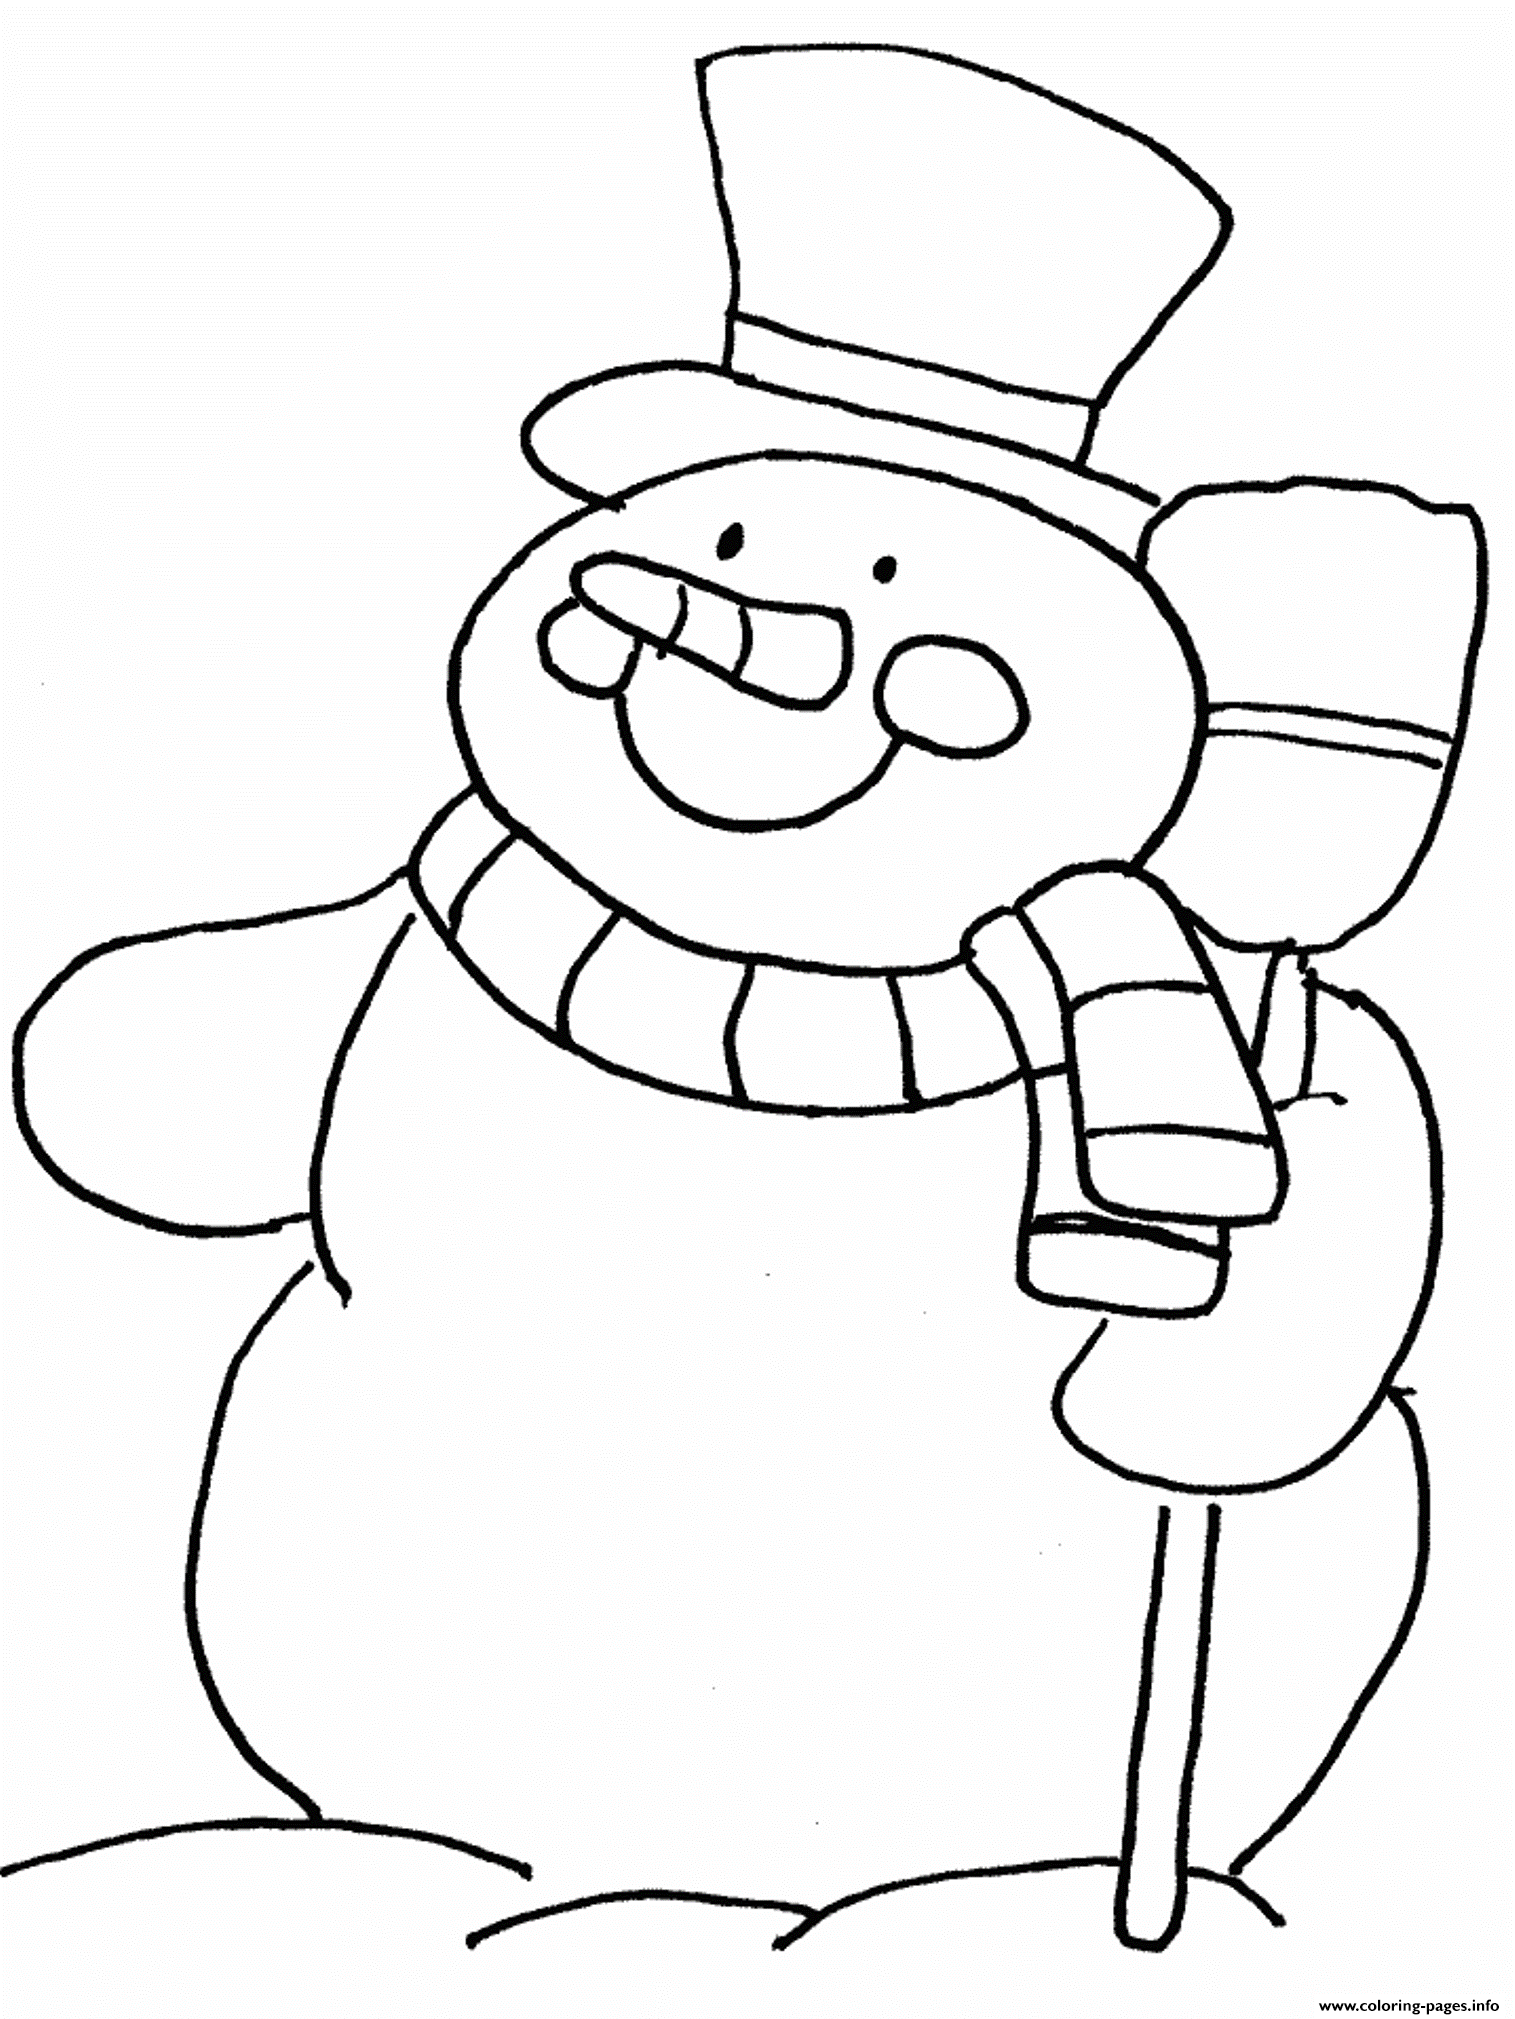 Download Winter Smiling Snowman 1812 Coloring Pages Printable